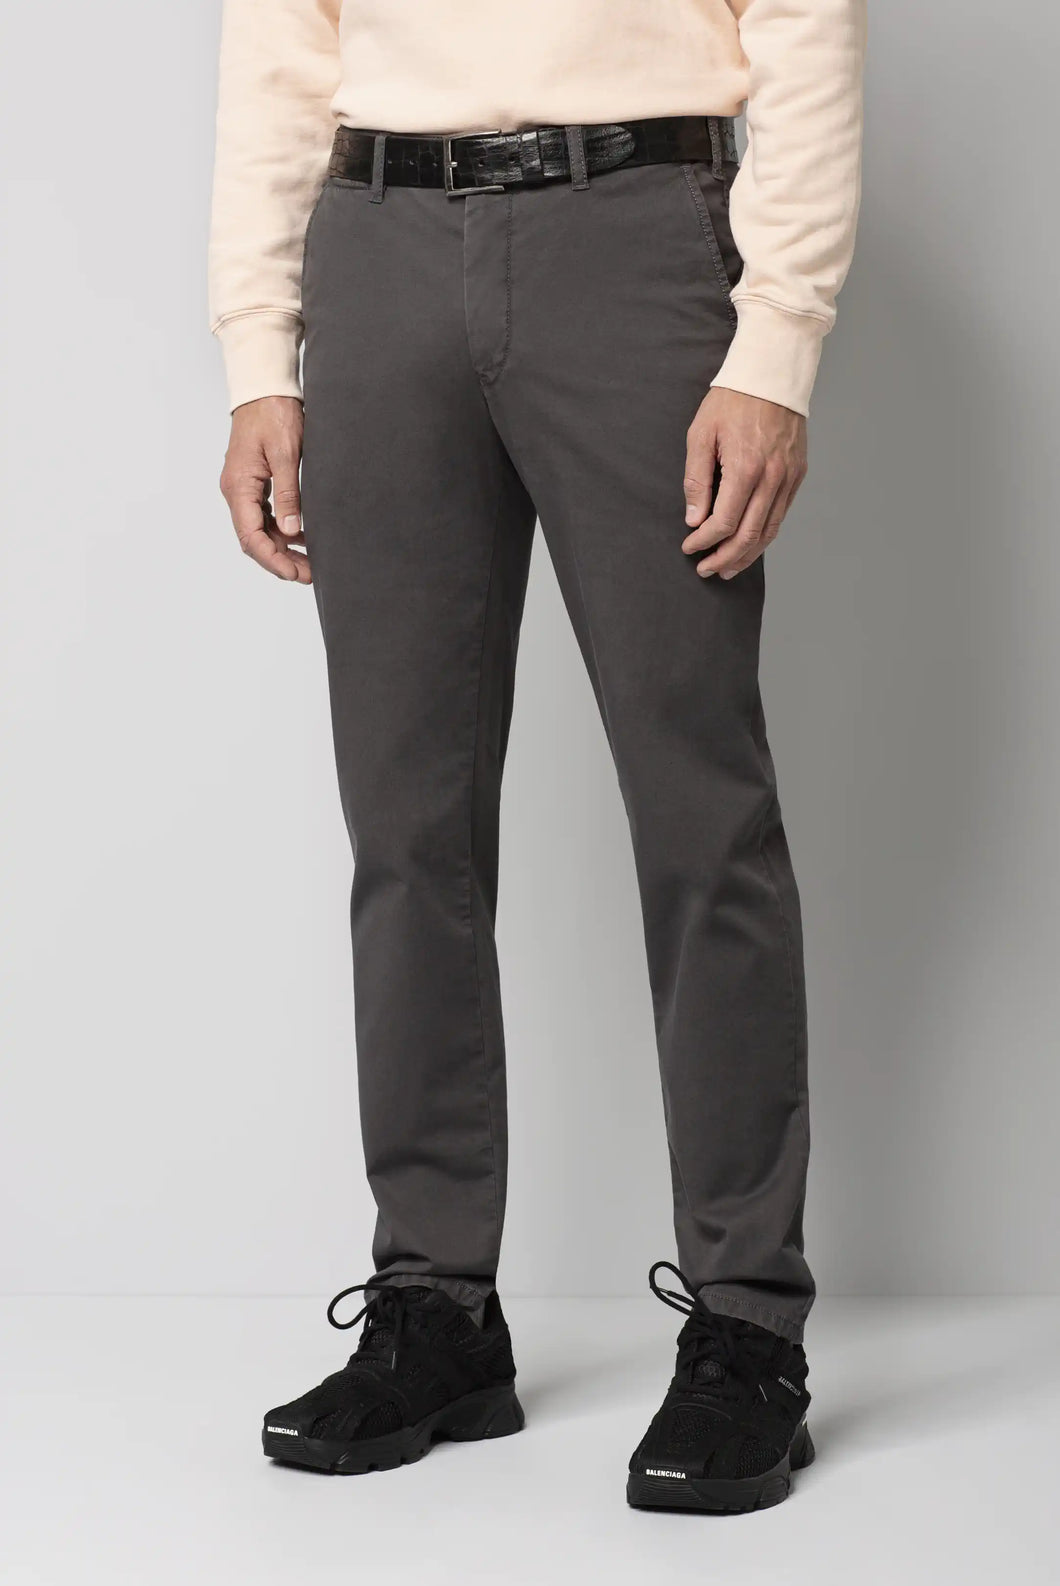 MEYER M5 Trousers - 6001 Soft Stretch Cotton Chinos - Charcoal